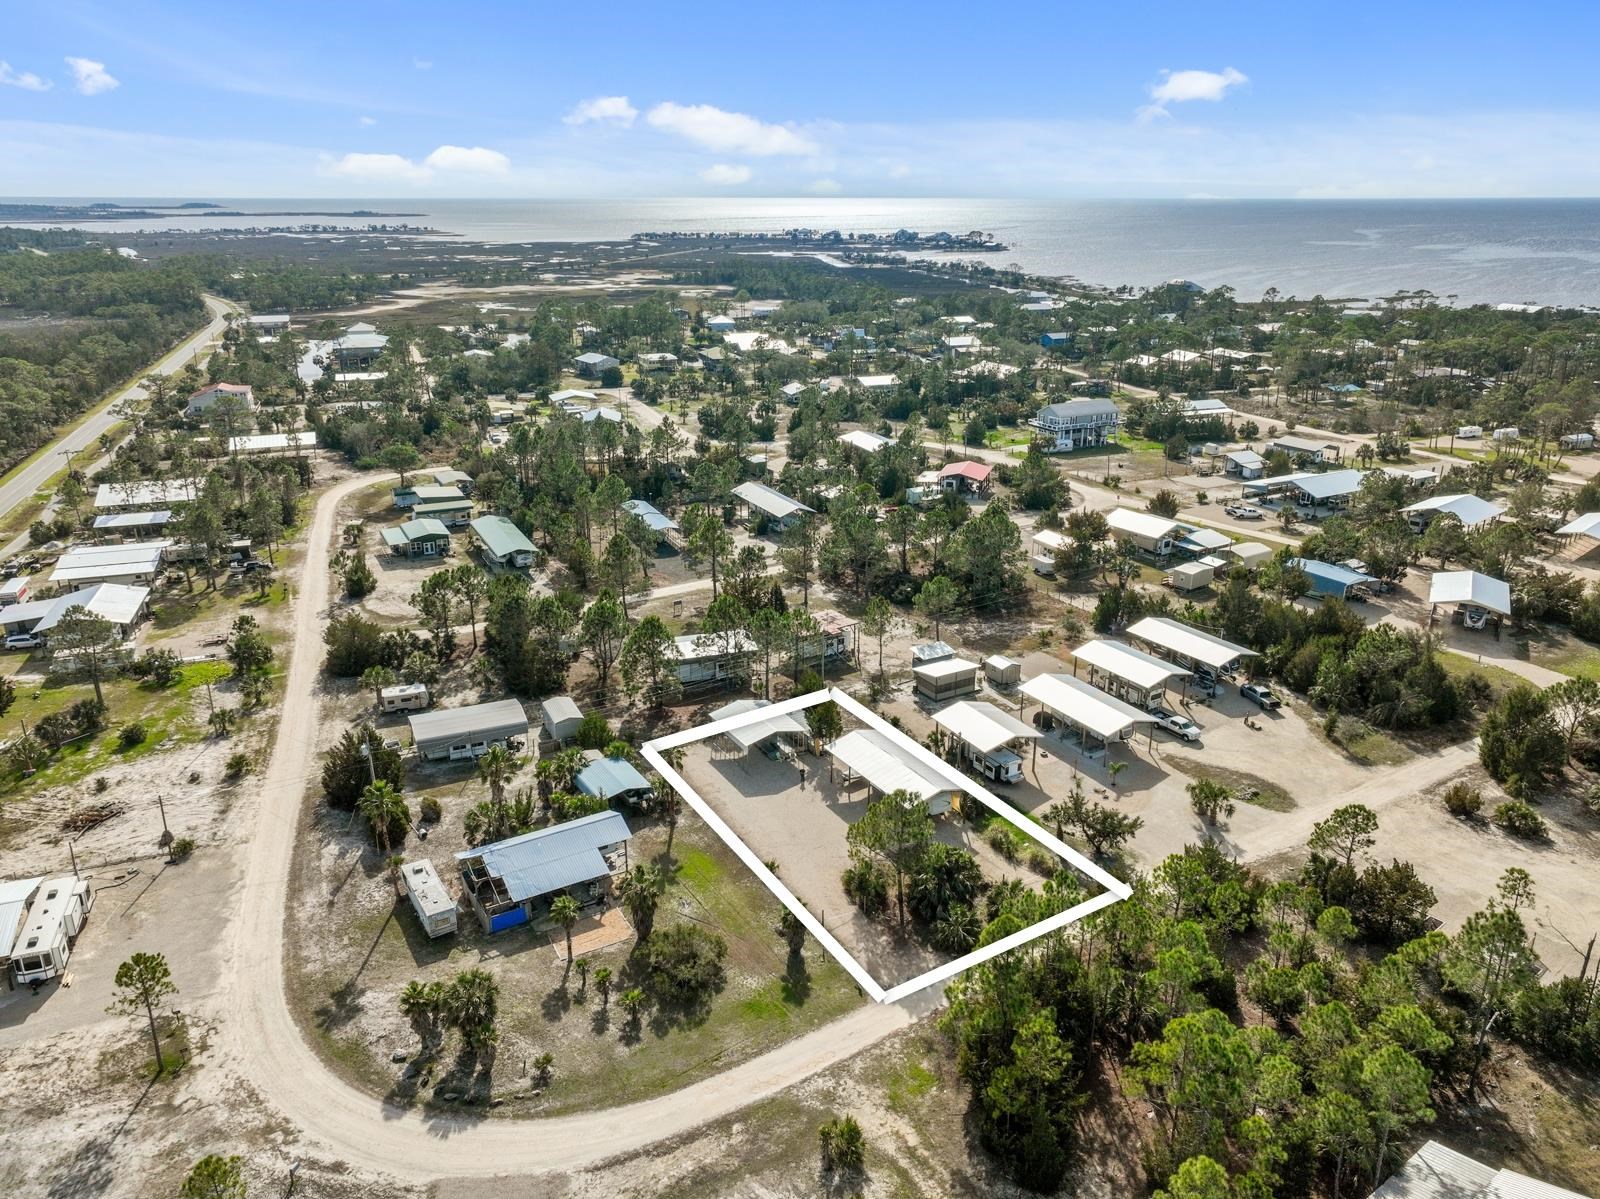 21151 Osprey,PERRY,Florida 32348-6666,Lots and land,Osprey,368139